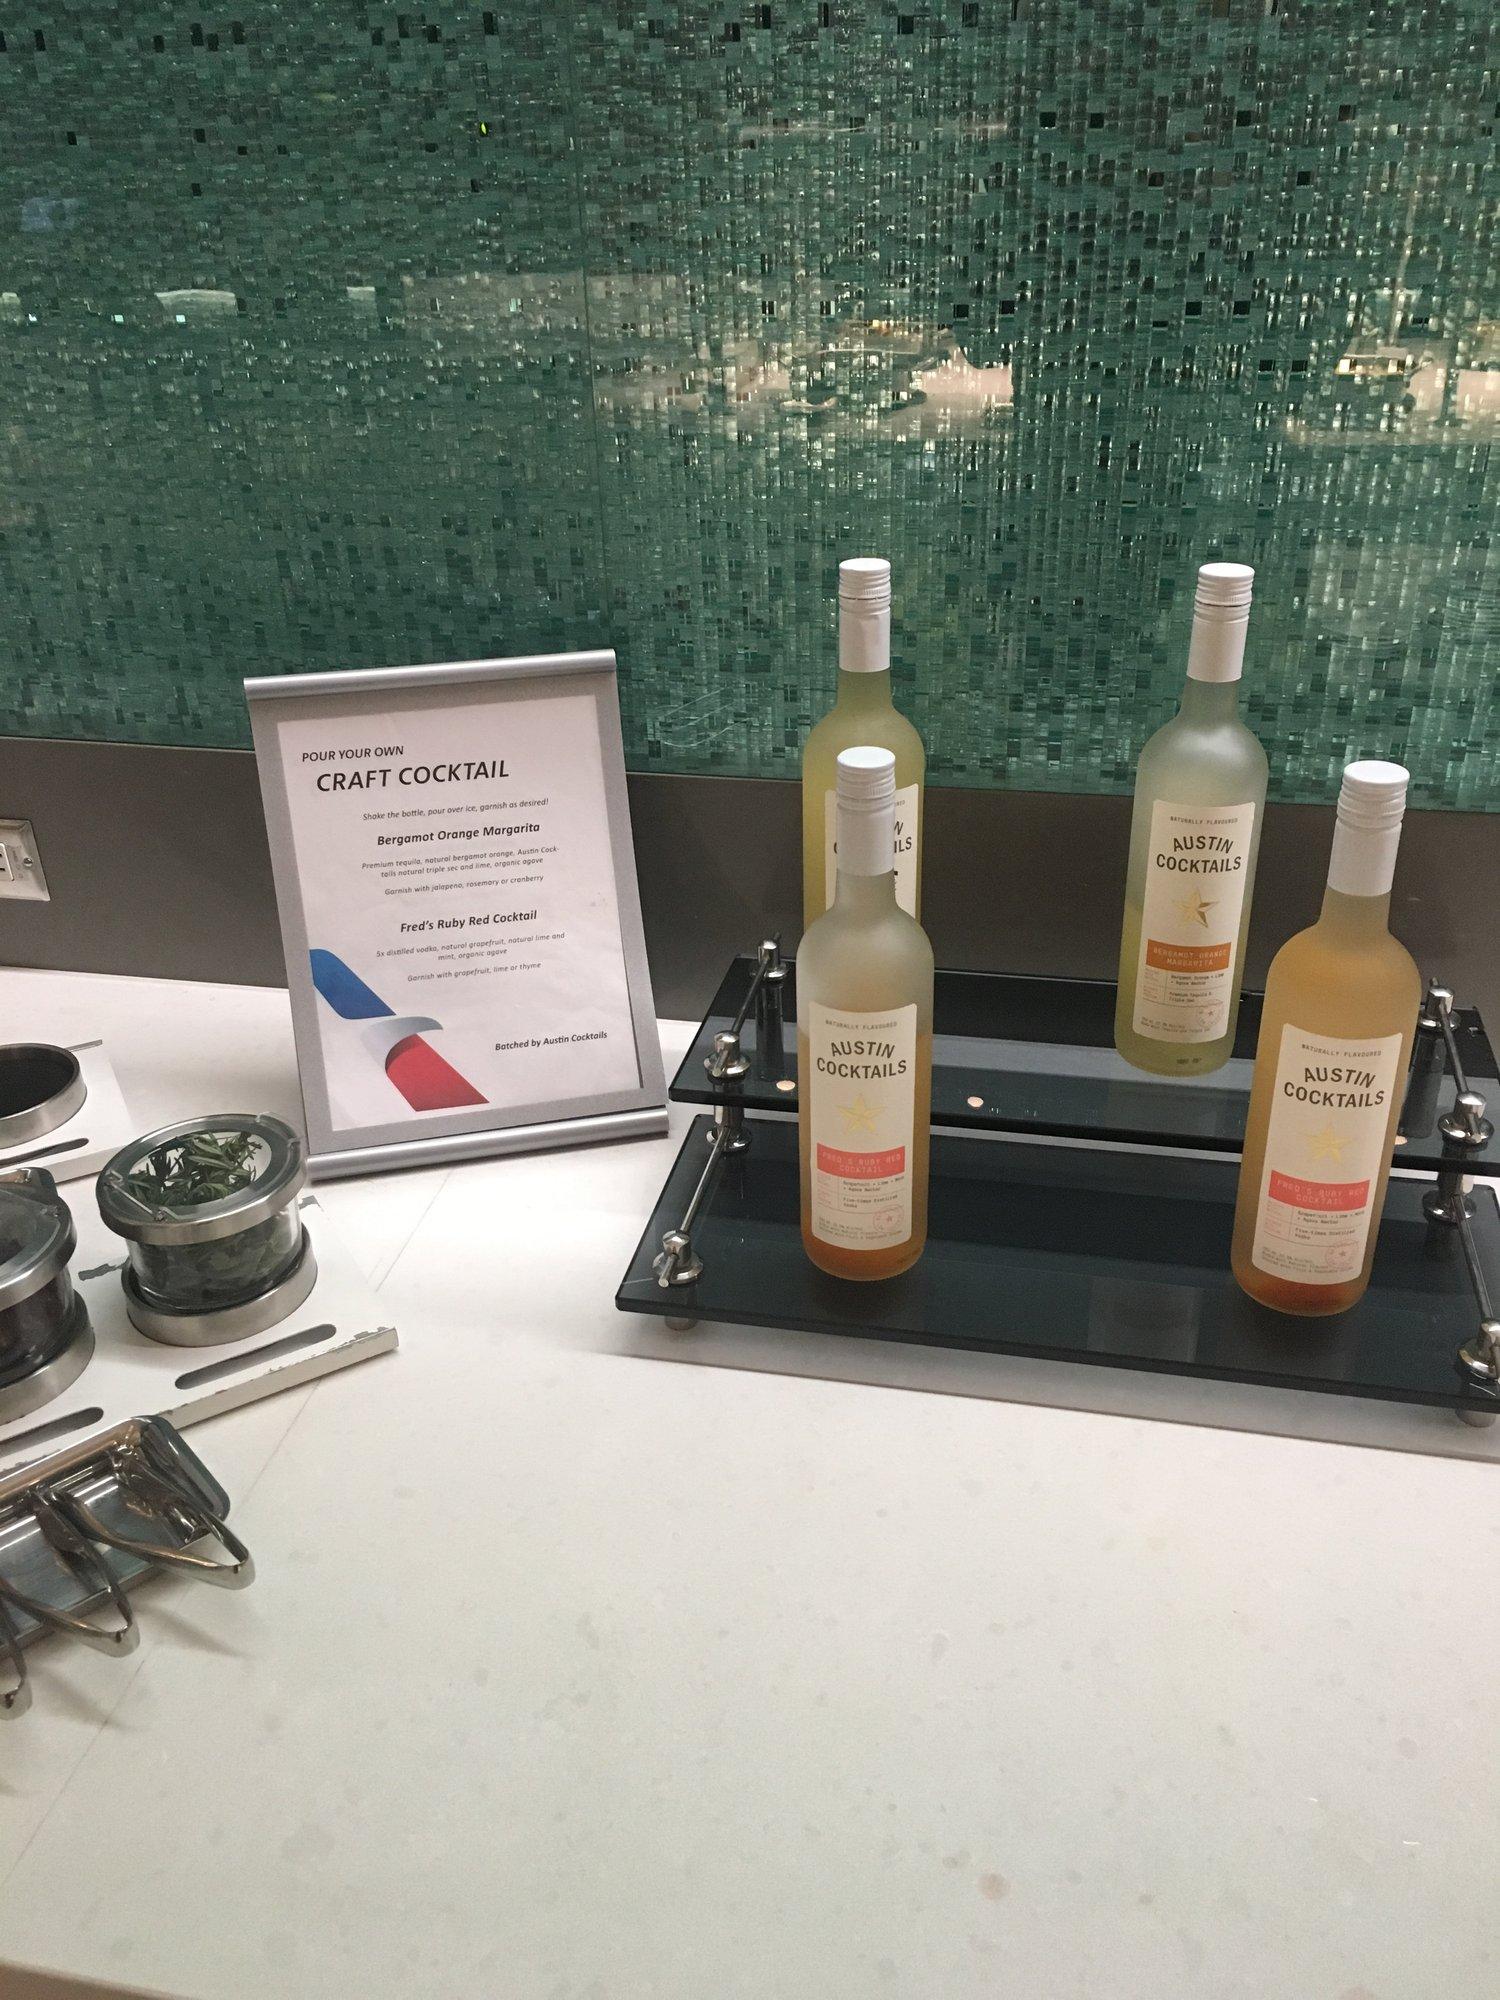 American Airlines Admirals Club image 5 of 17